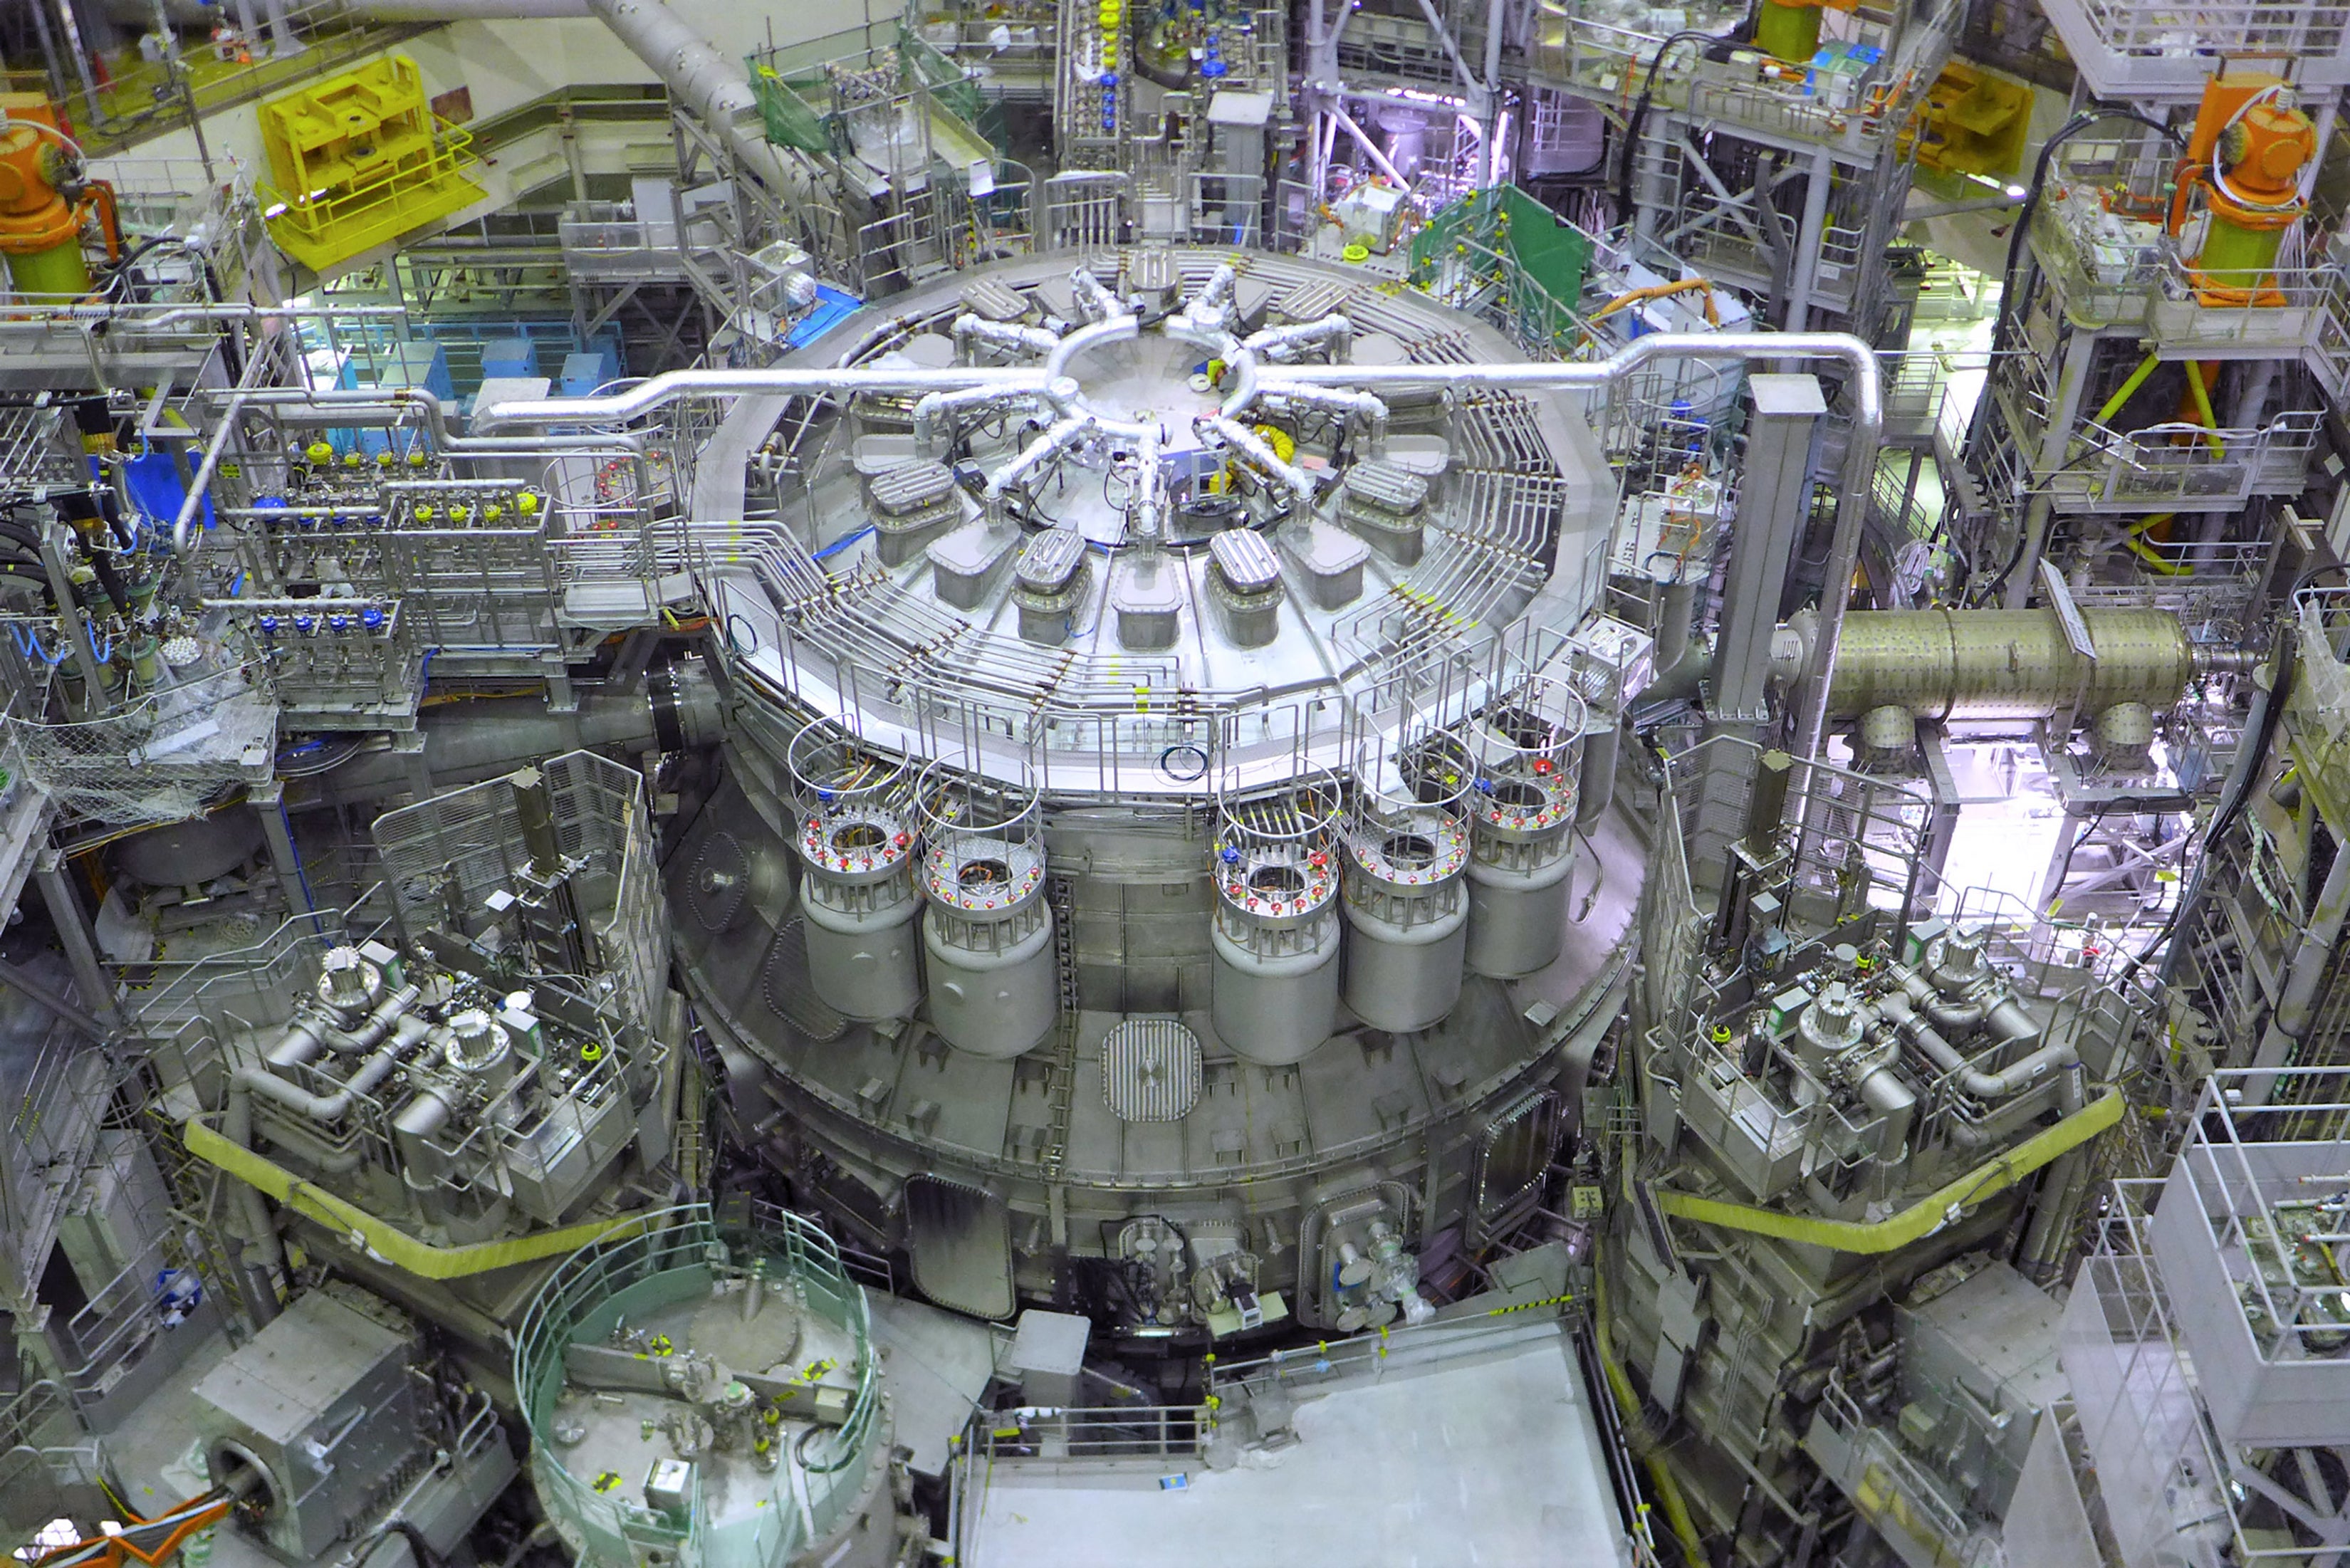 The JT-60SA is the world’s biggest nuclear fusion reactor constructed to date